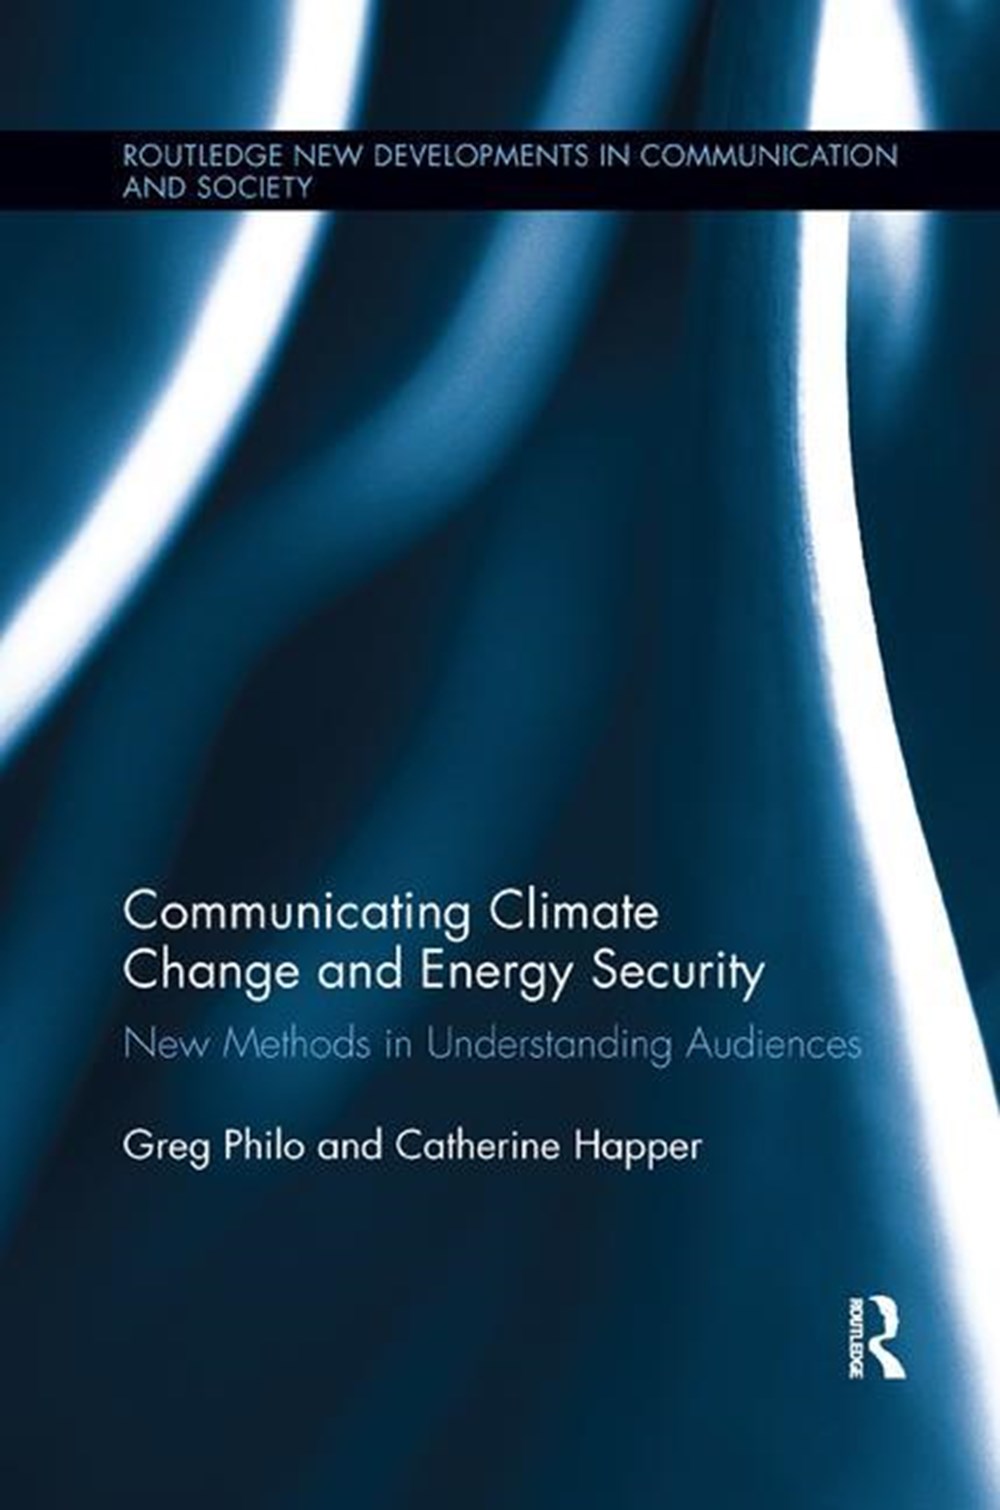 Communicating Climate Change and Energy Security New Methods in Understanding Audiences